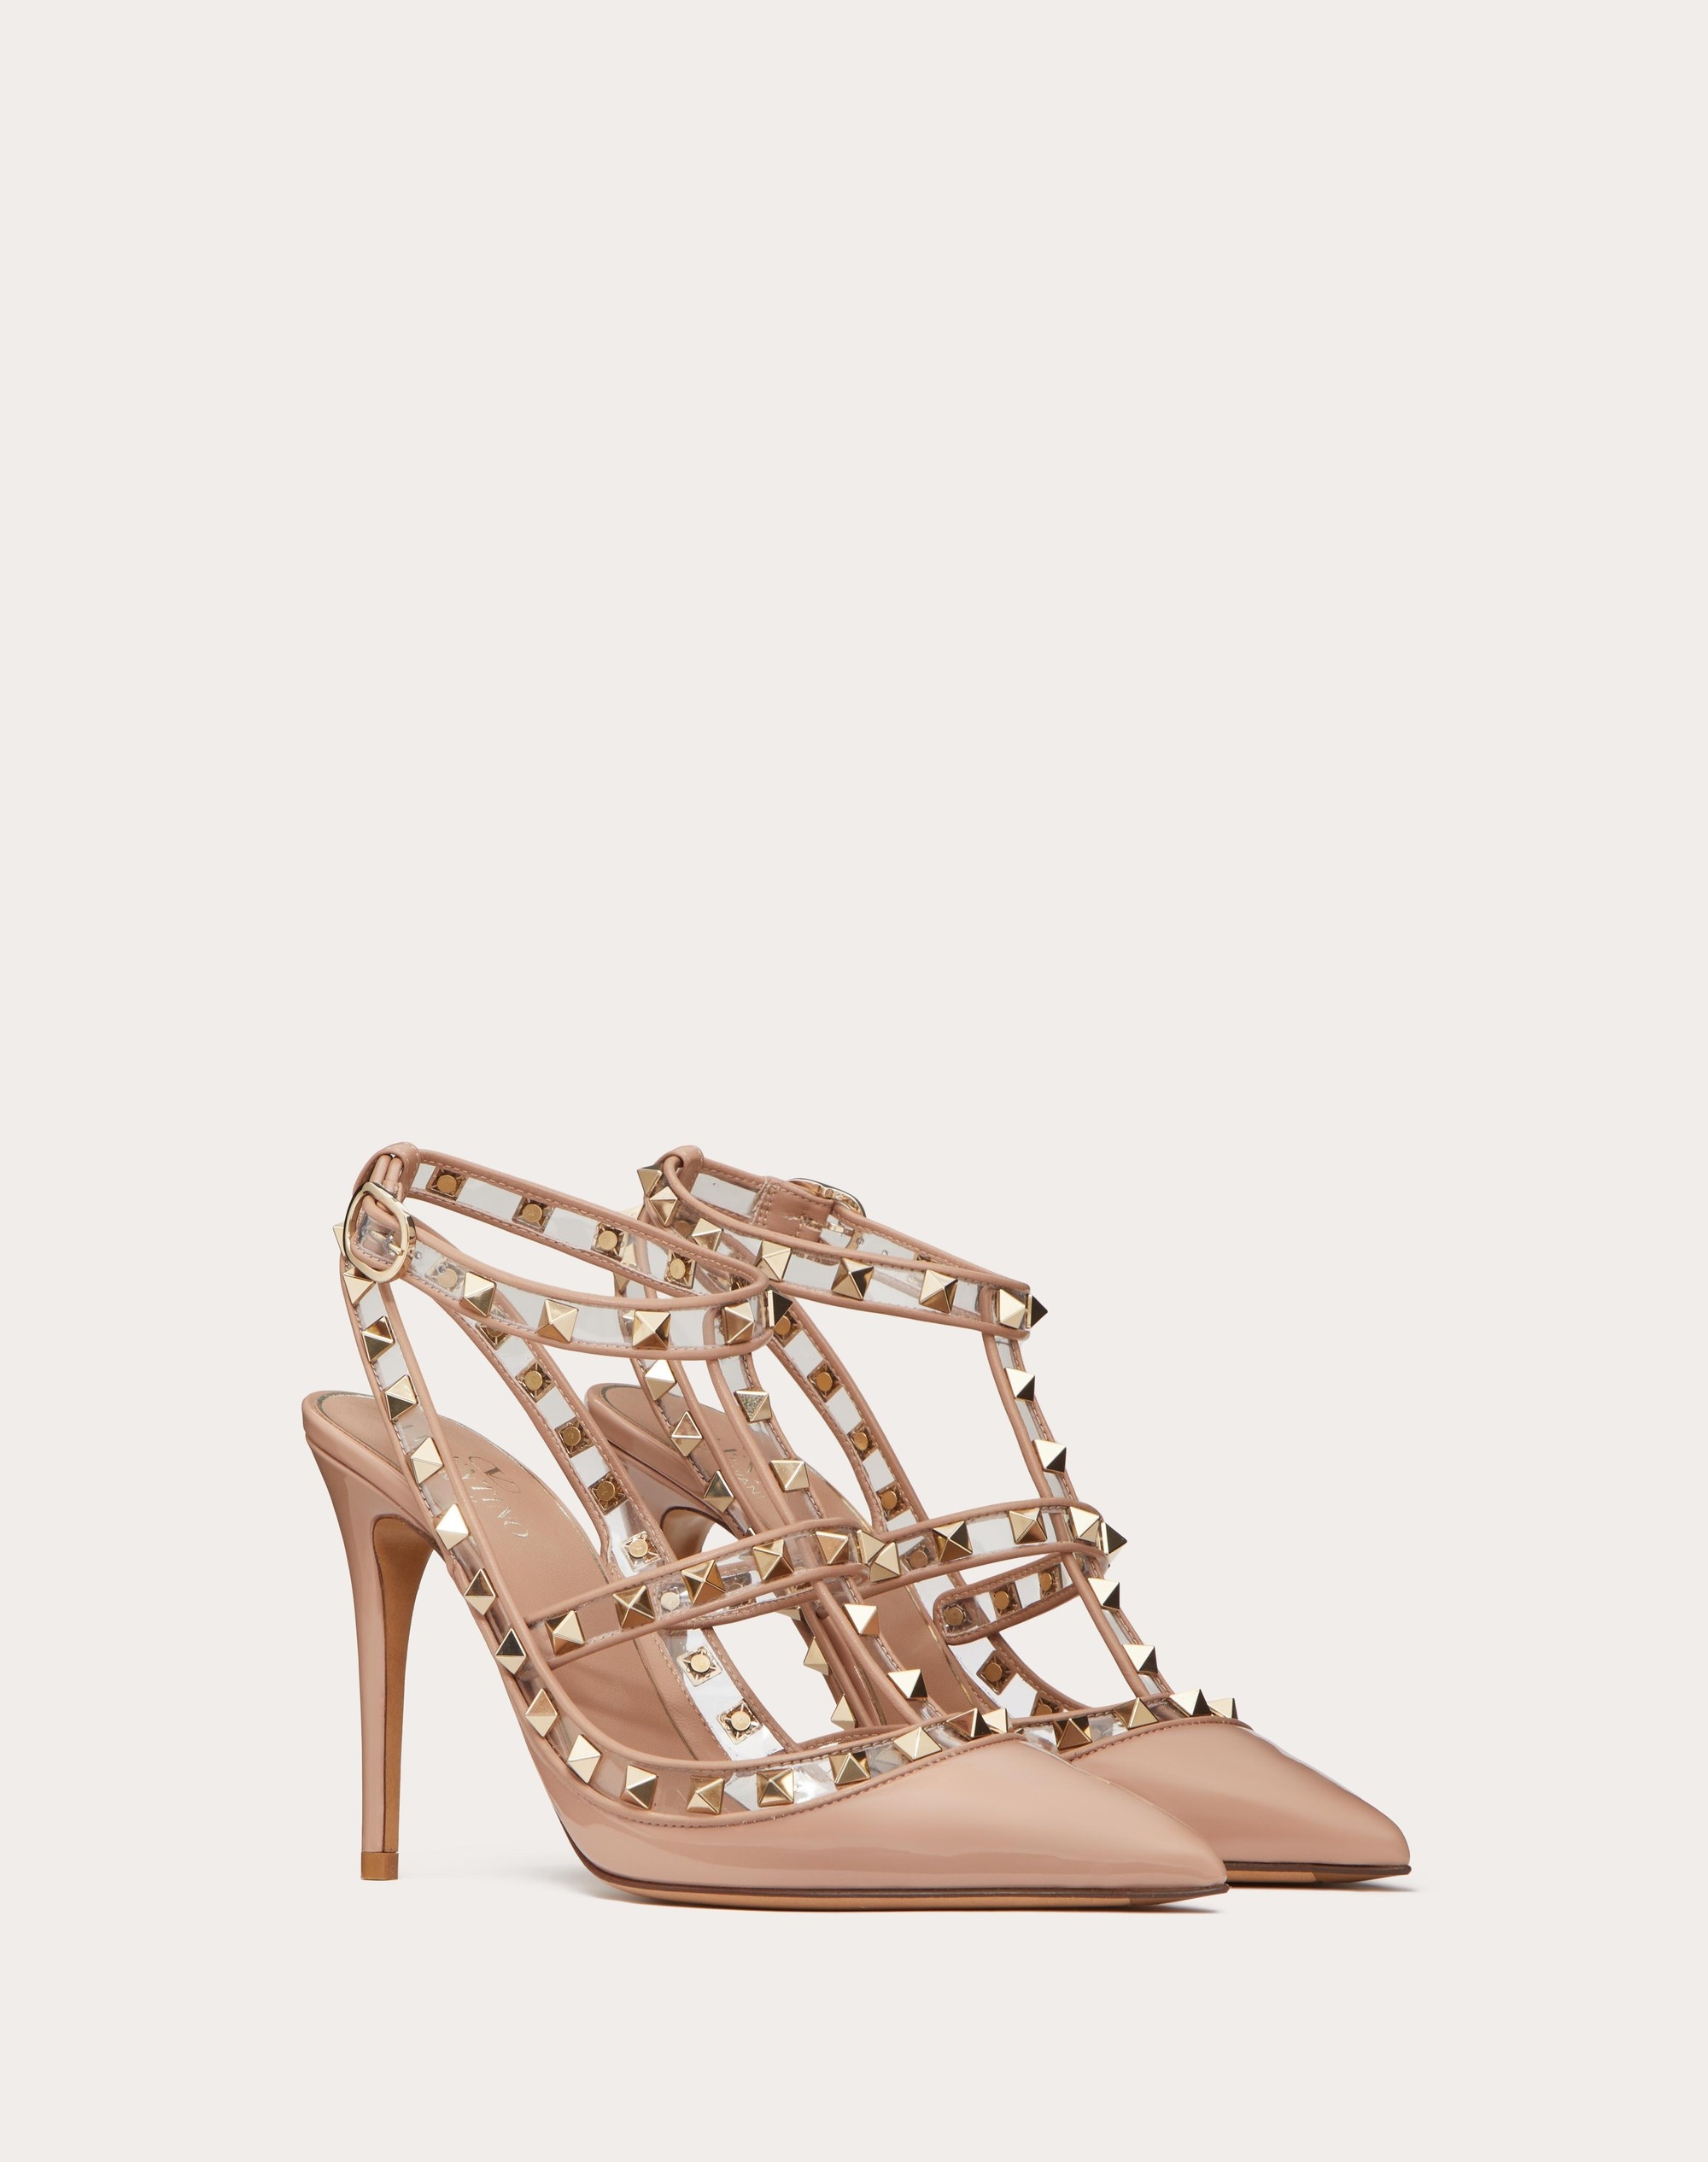 ROCKSTUD PUMPS IN PATENT LEATHER AND POLYMERIC MATERIAL WITH STRAPS 100MM - 2